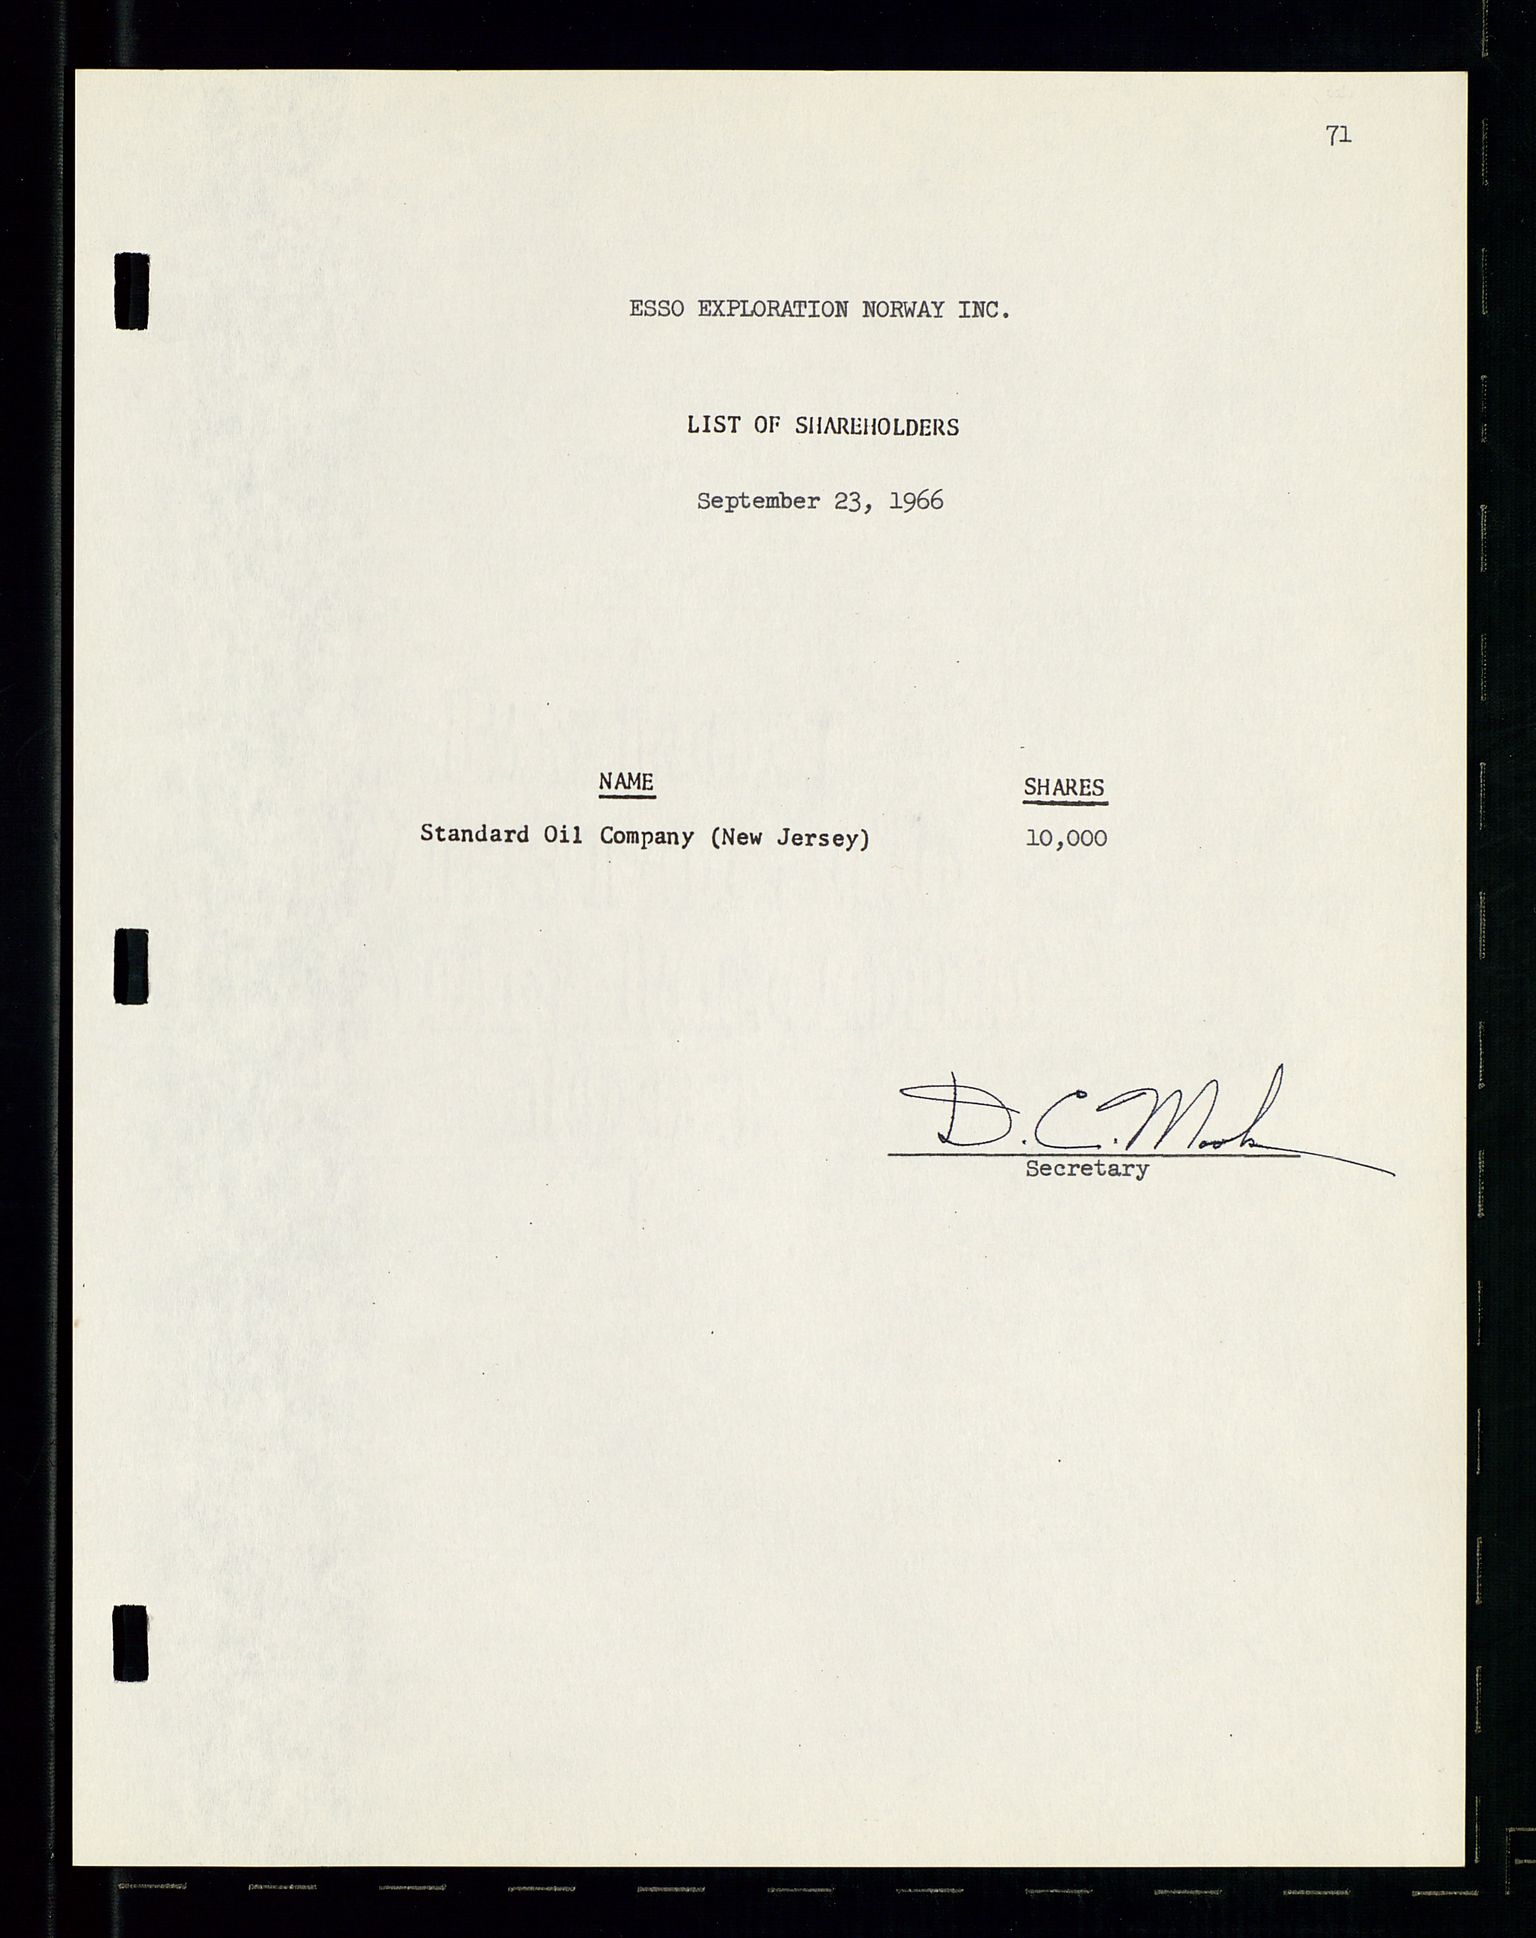 Pa 1512 - Esso Exploration and Production Norway Inc., SAST/A-101917/A/Aa/L0001/0001: Styredokumenter / Corporate records, By-Laws, Board meeting minutes, Incorporations, 1965-1975, p. 71